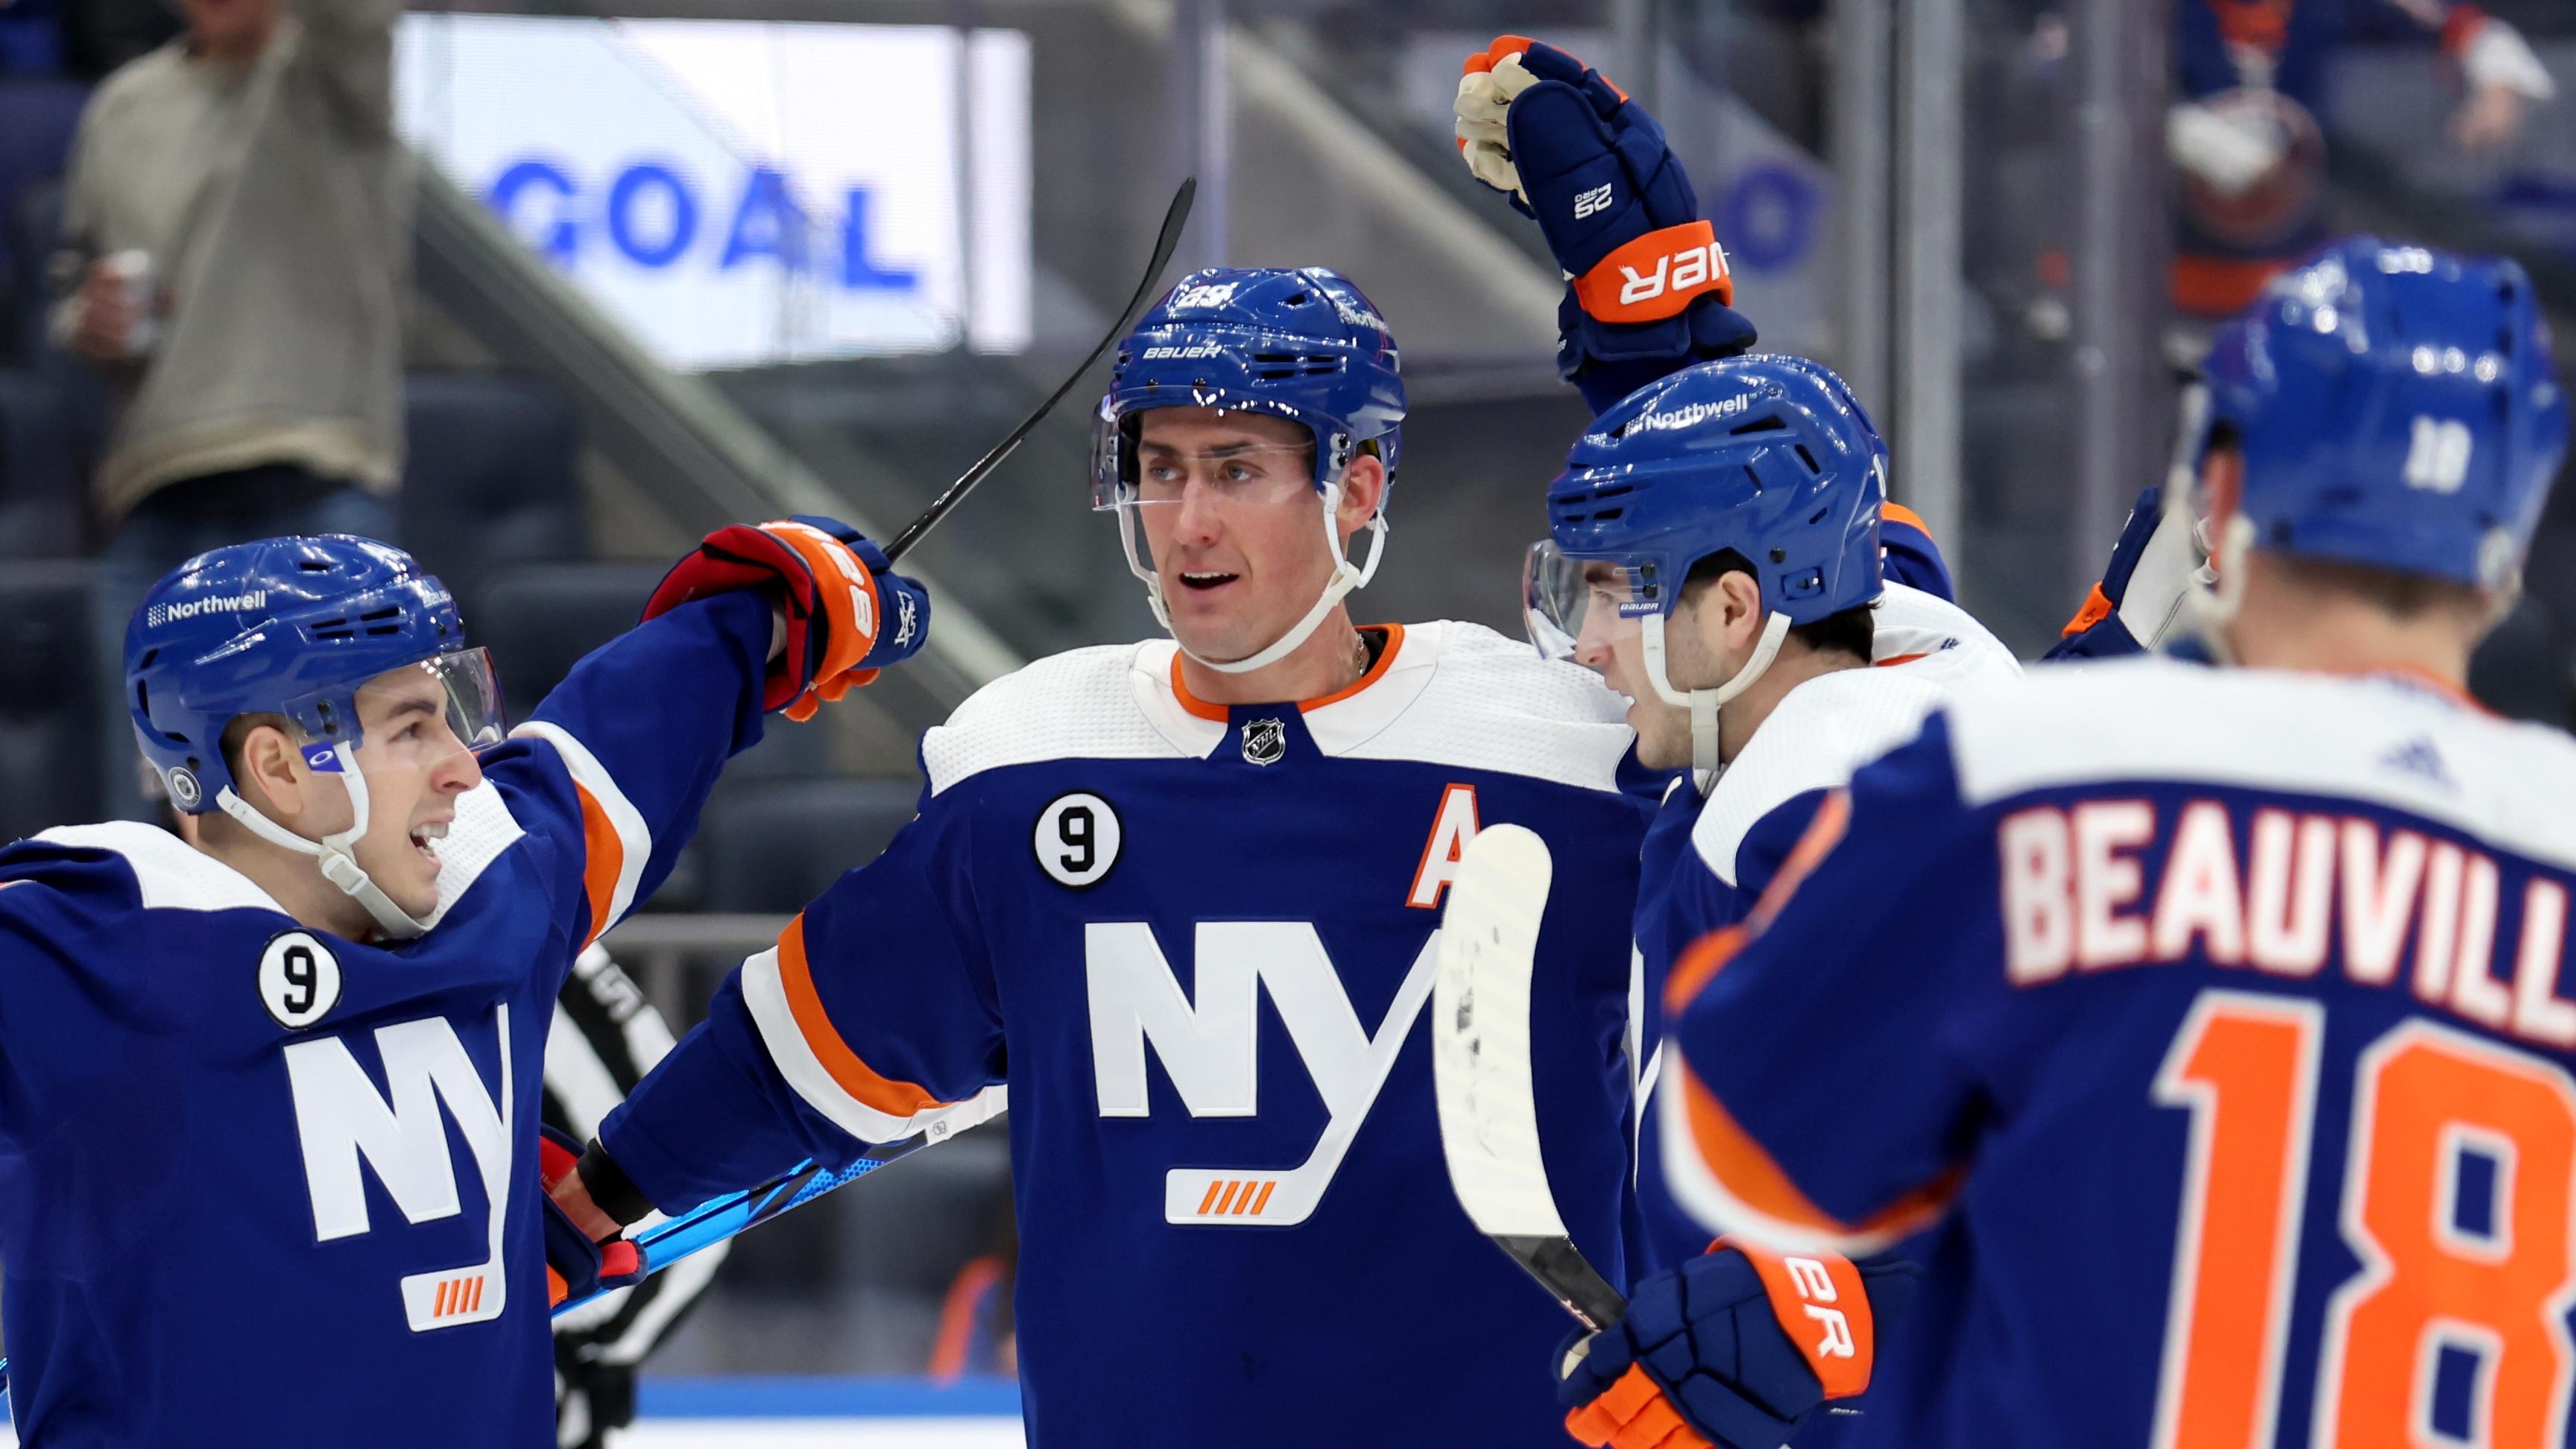 Mar 5, 2022; Elmont, New York, USA; New York Islanders center Brock Nelson (29) celebrates his goal against the St. Louis Blues with teammates during the second period at UBS Arena. Mandatory Credit: Brad Penner-USA TODAY Sports / © Brad Penner-USA TODAY Sports